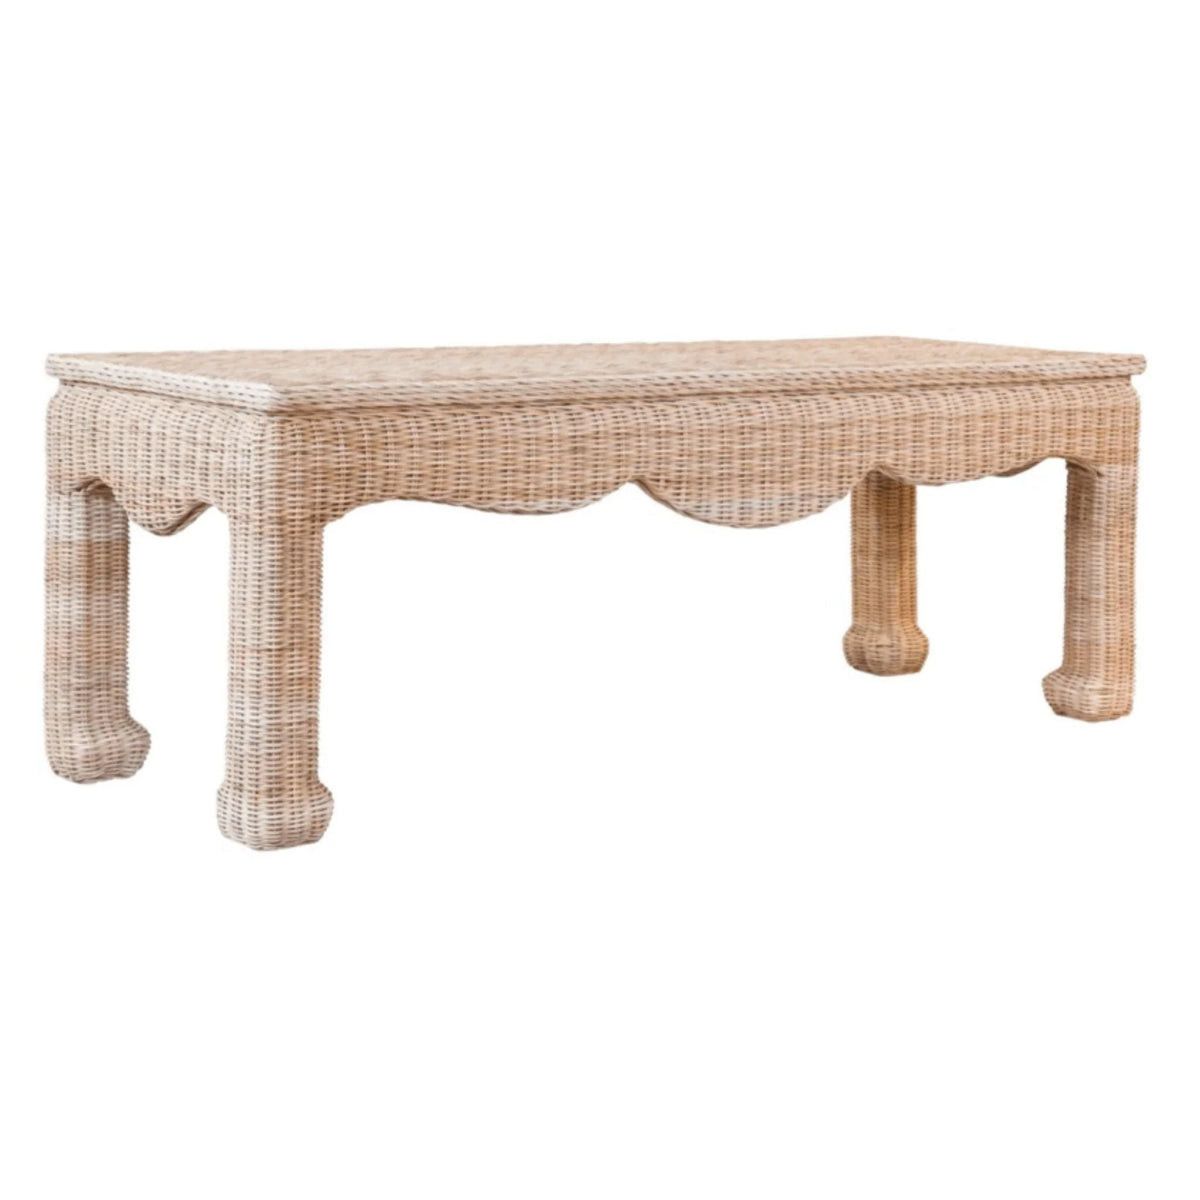 Rattan Ming Style Bench | The Well Appointed House, LLC